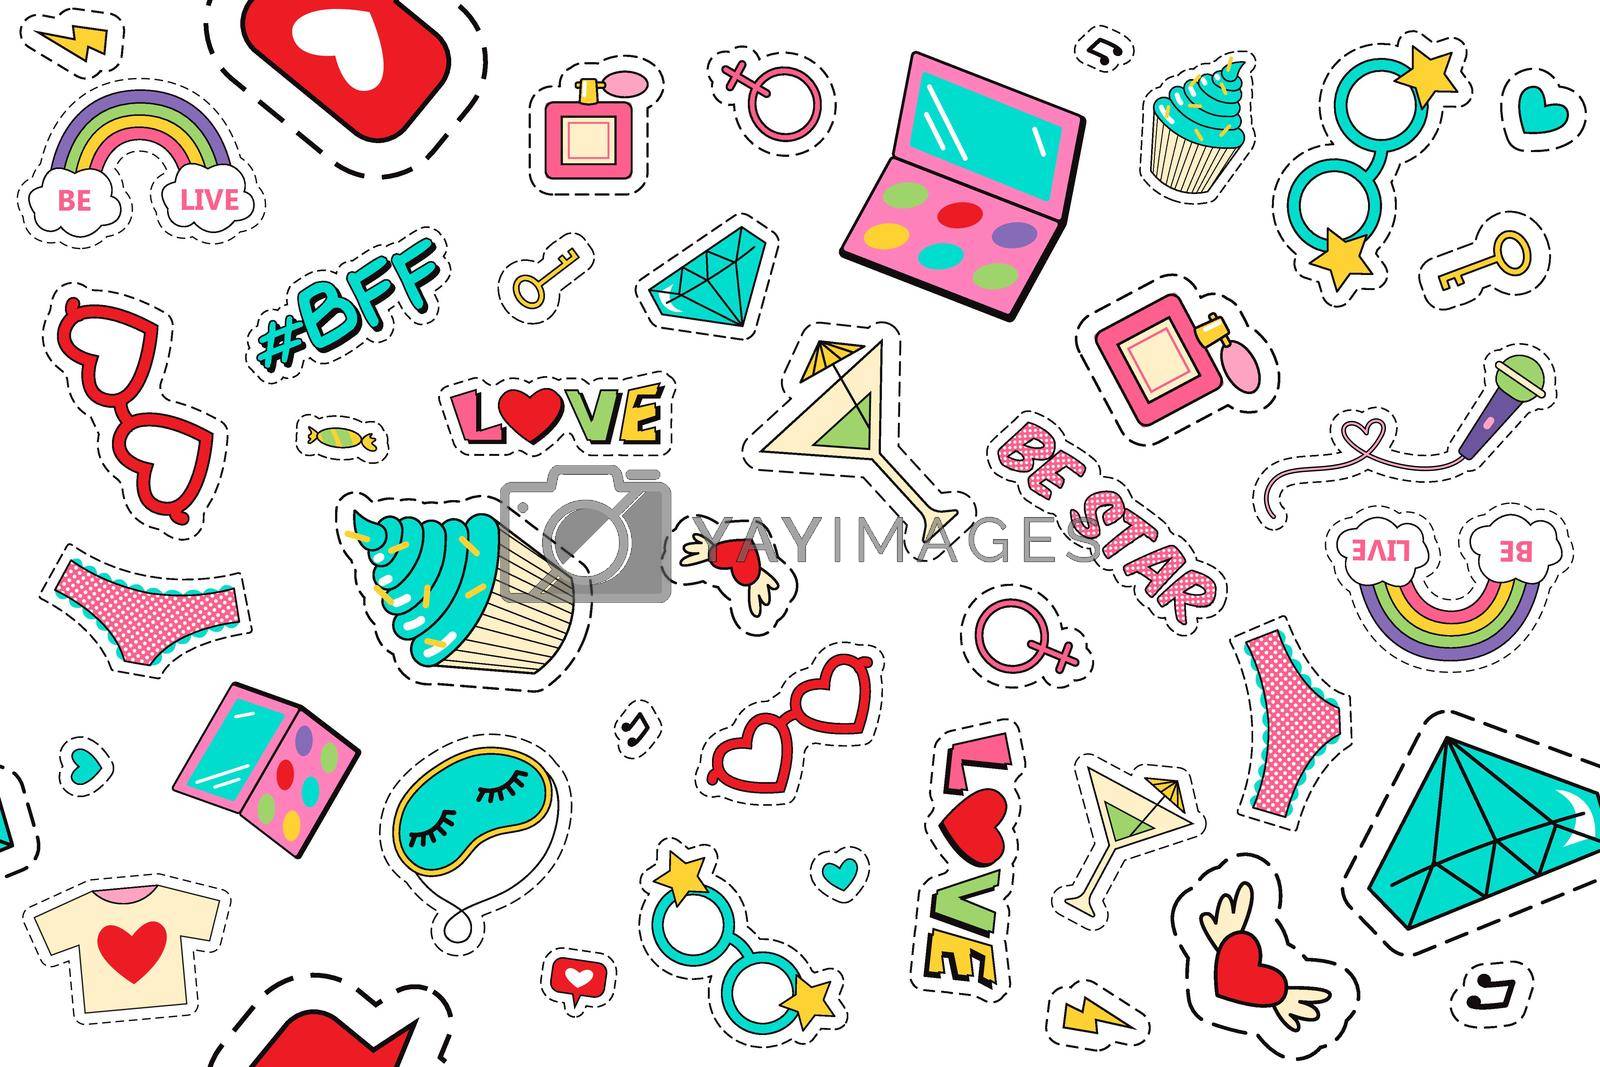 Fashion patches doodle set. Collection of funny comic girl teens colouring badges fashionable teenage fabric kawaii stickers ice cream donut diary gems. Feminine labels seamless illustration for print